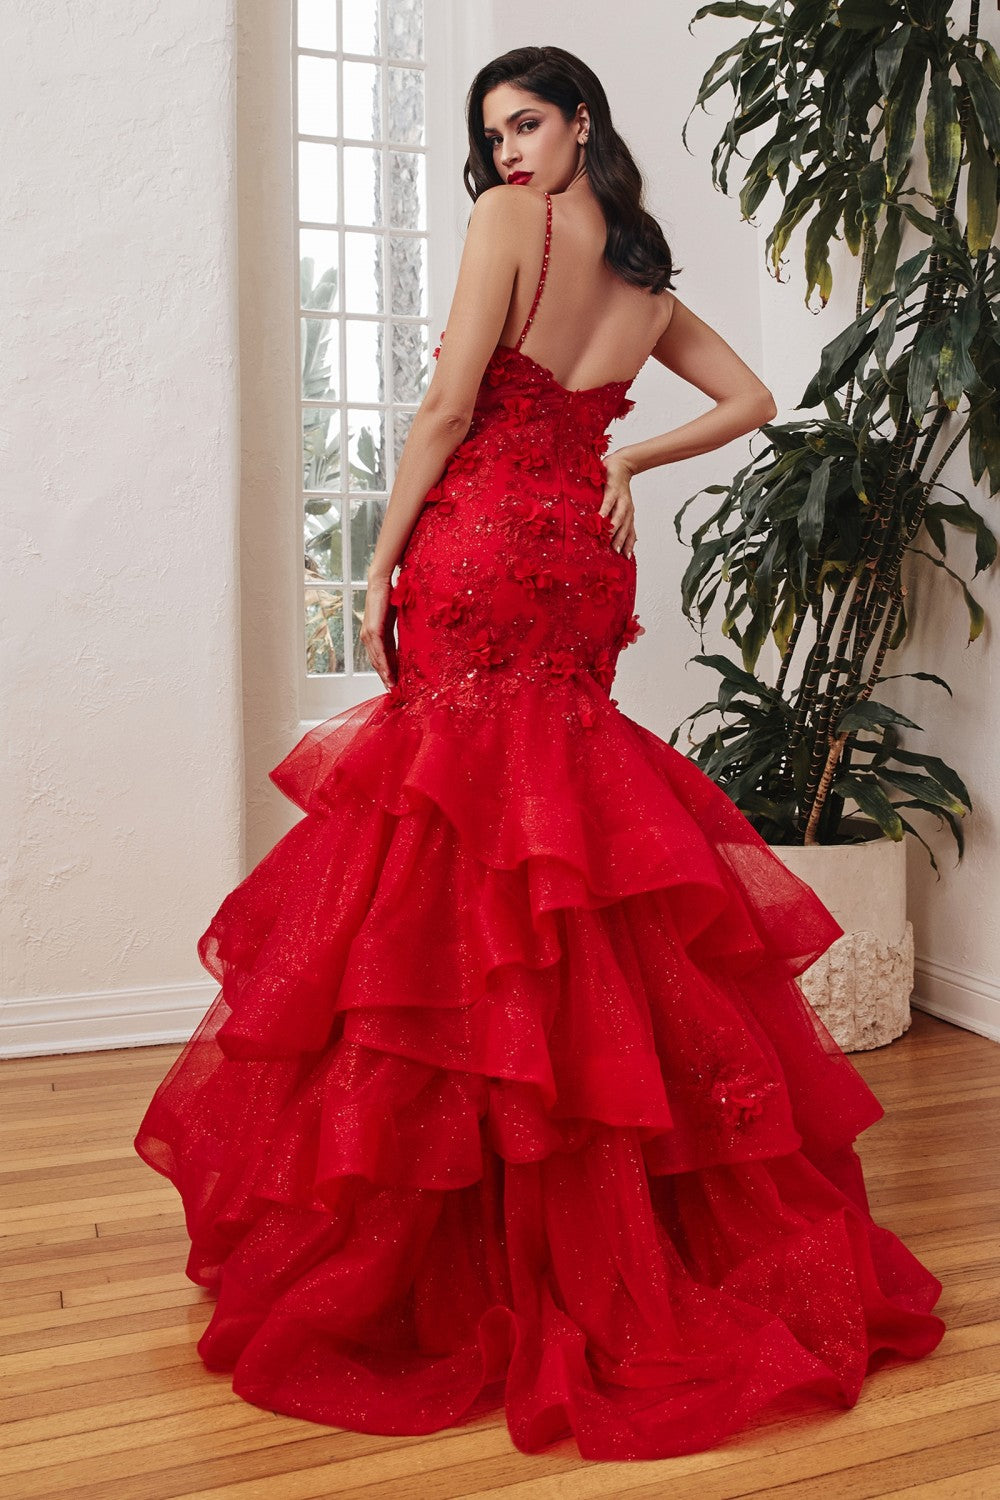 Glitter Feather Long Train Feminine Red Prom Gown - Xdressy